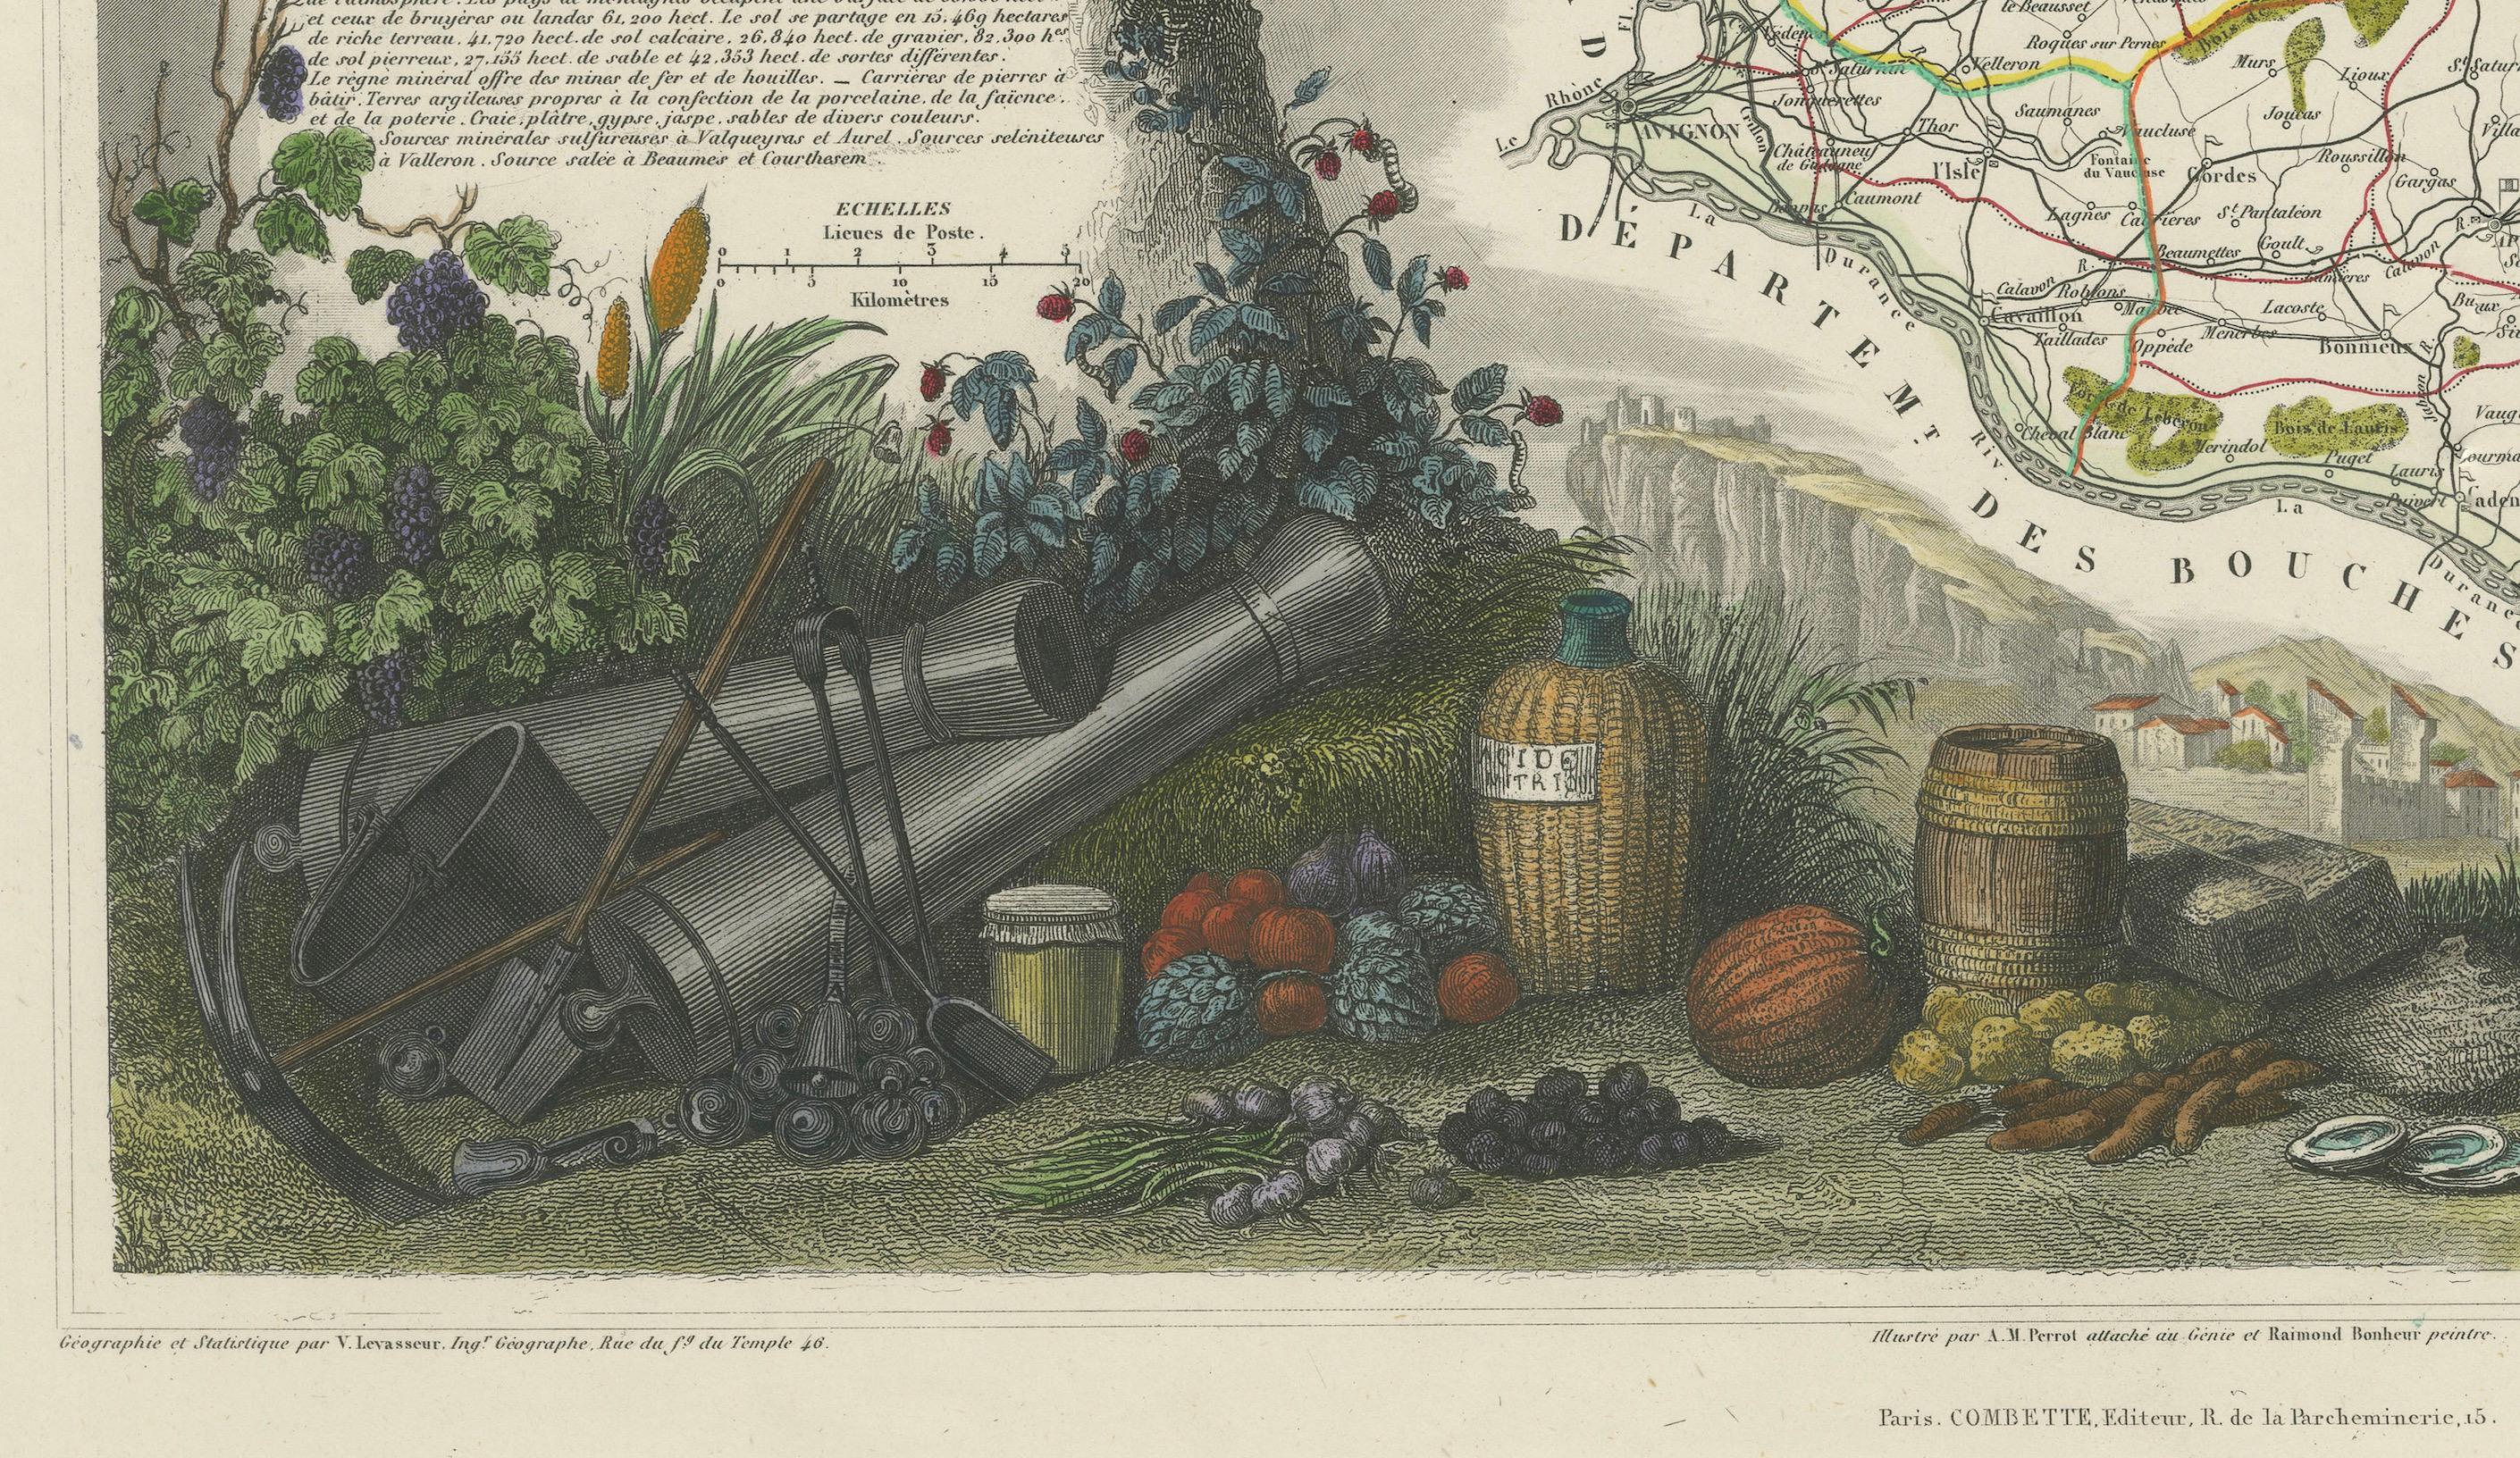 Paper Old Map of Vaucluse, France: A Cartographic Celebration of Viticulture, 1852 For Sale